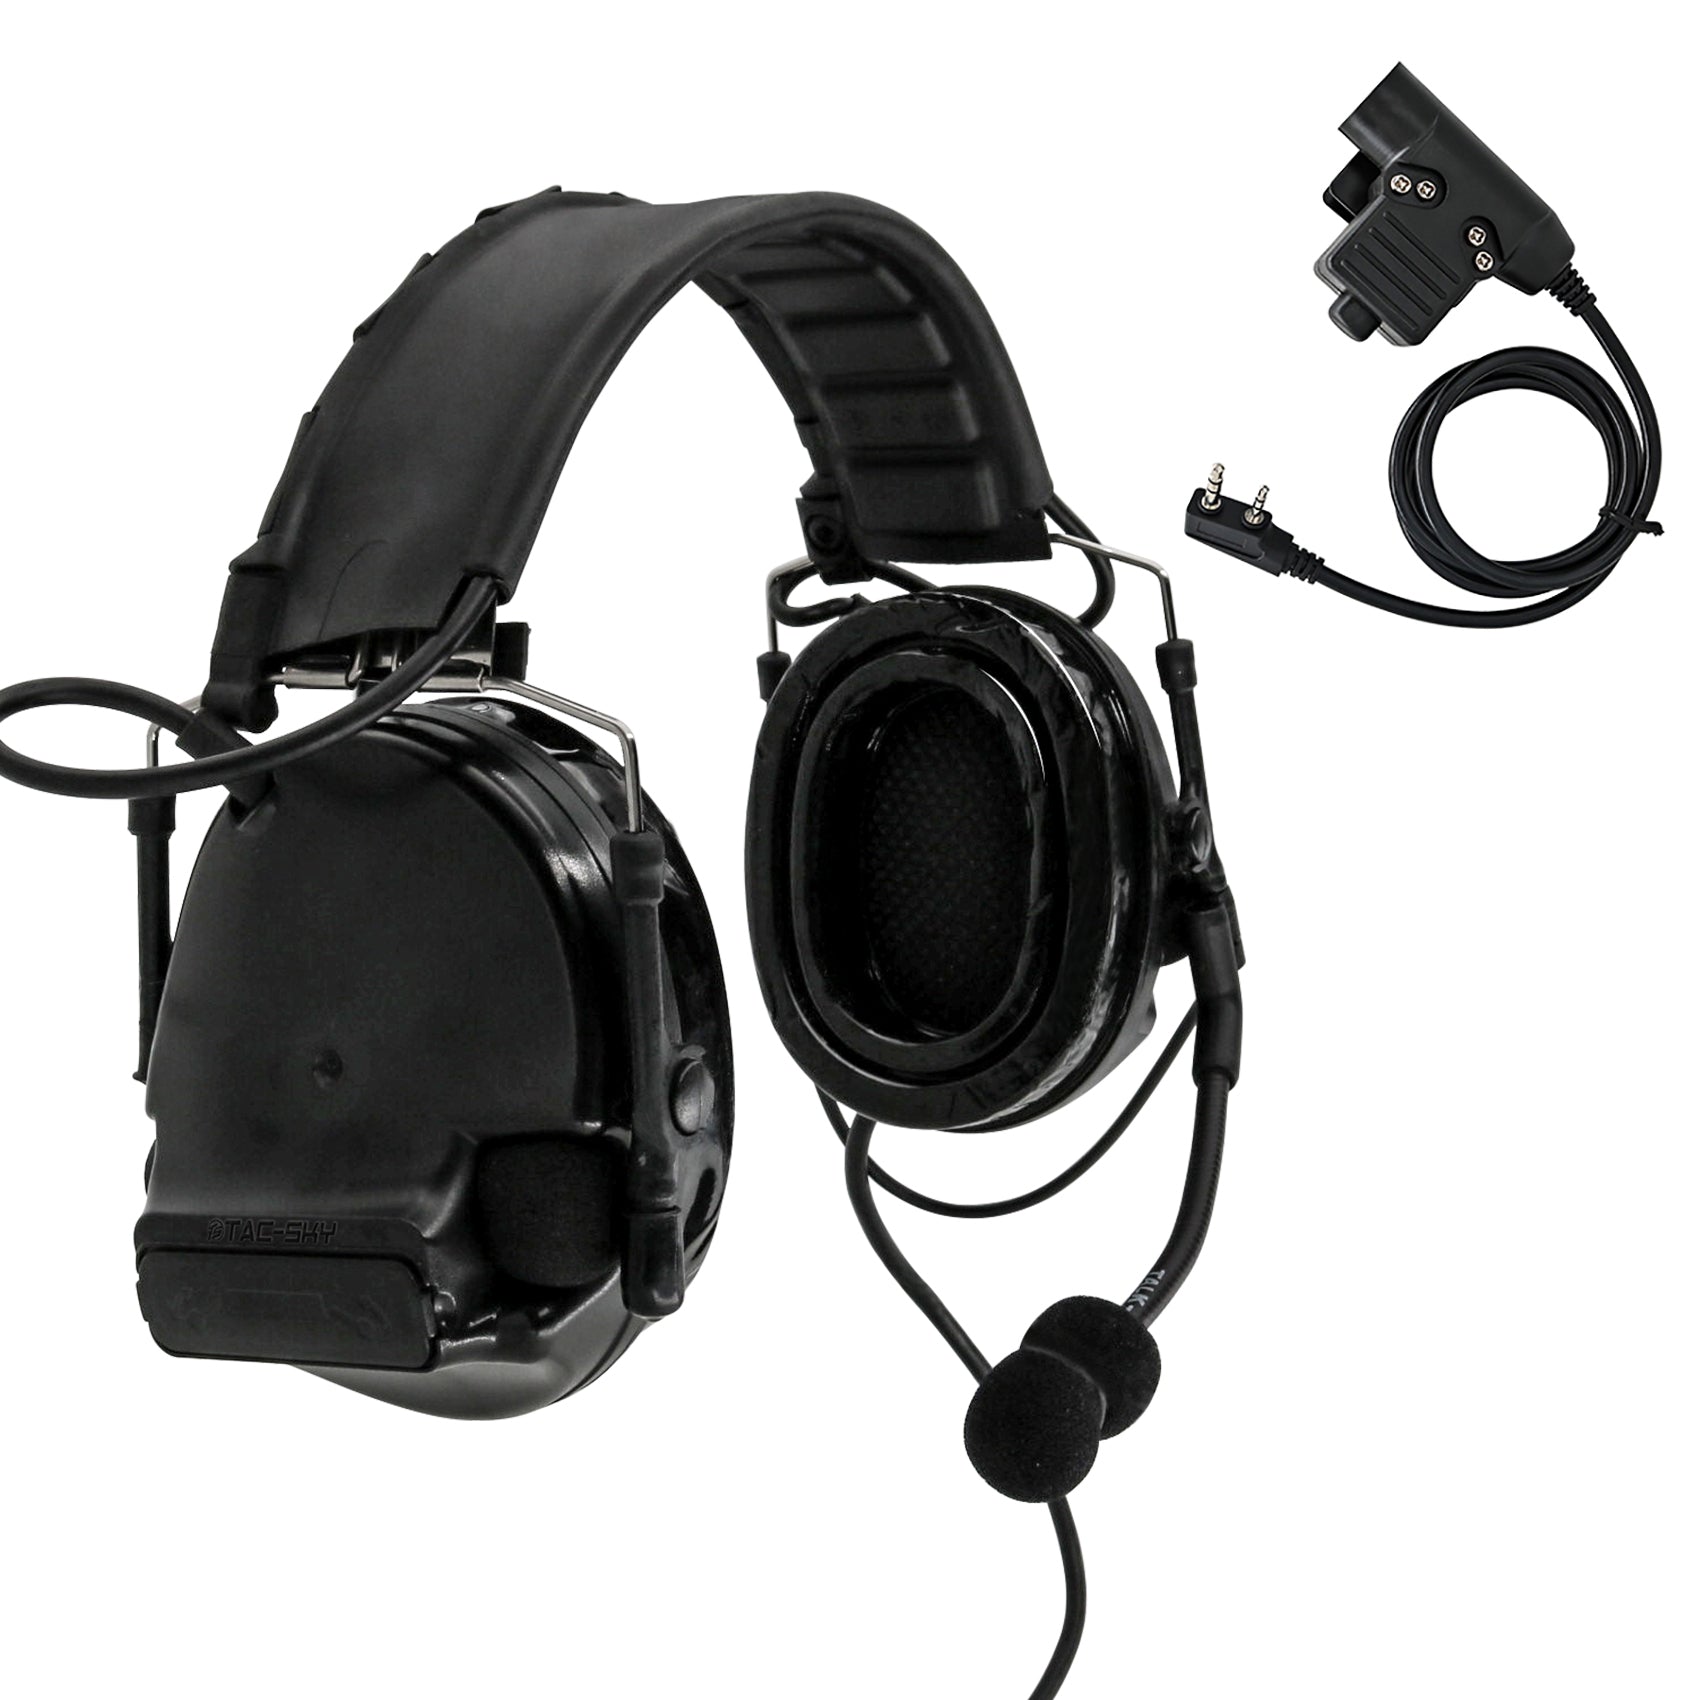 TS TAC-SKY: TAC-SKY Focused on creating quality tactical headsets